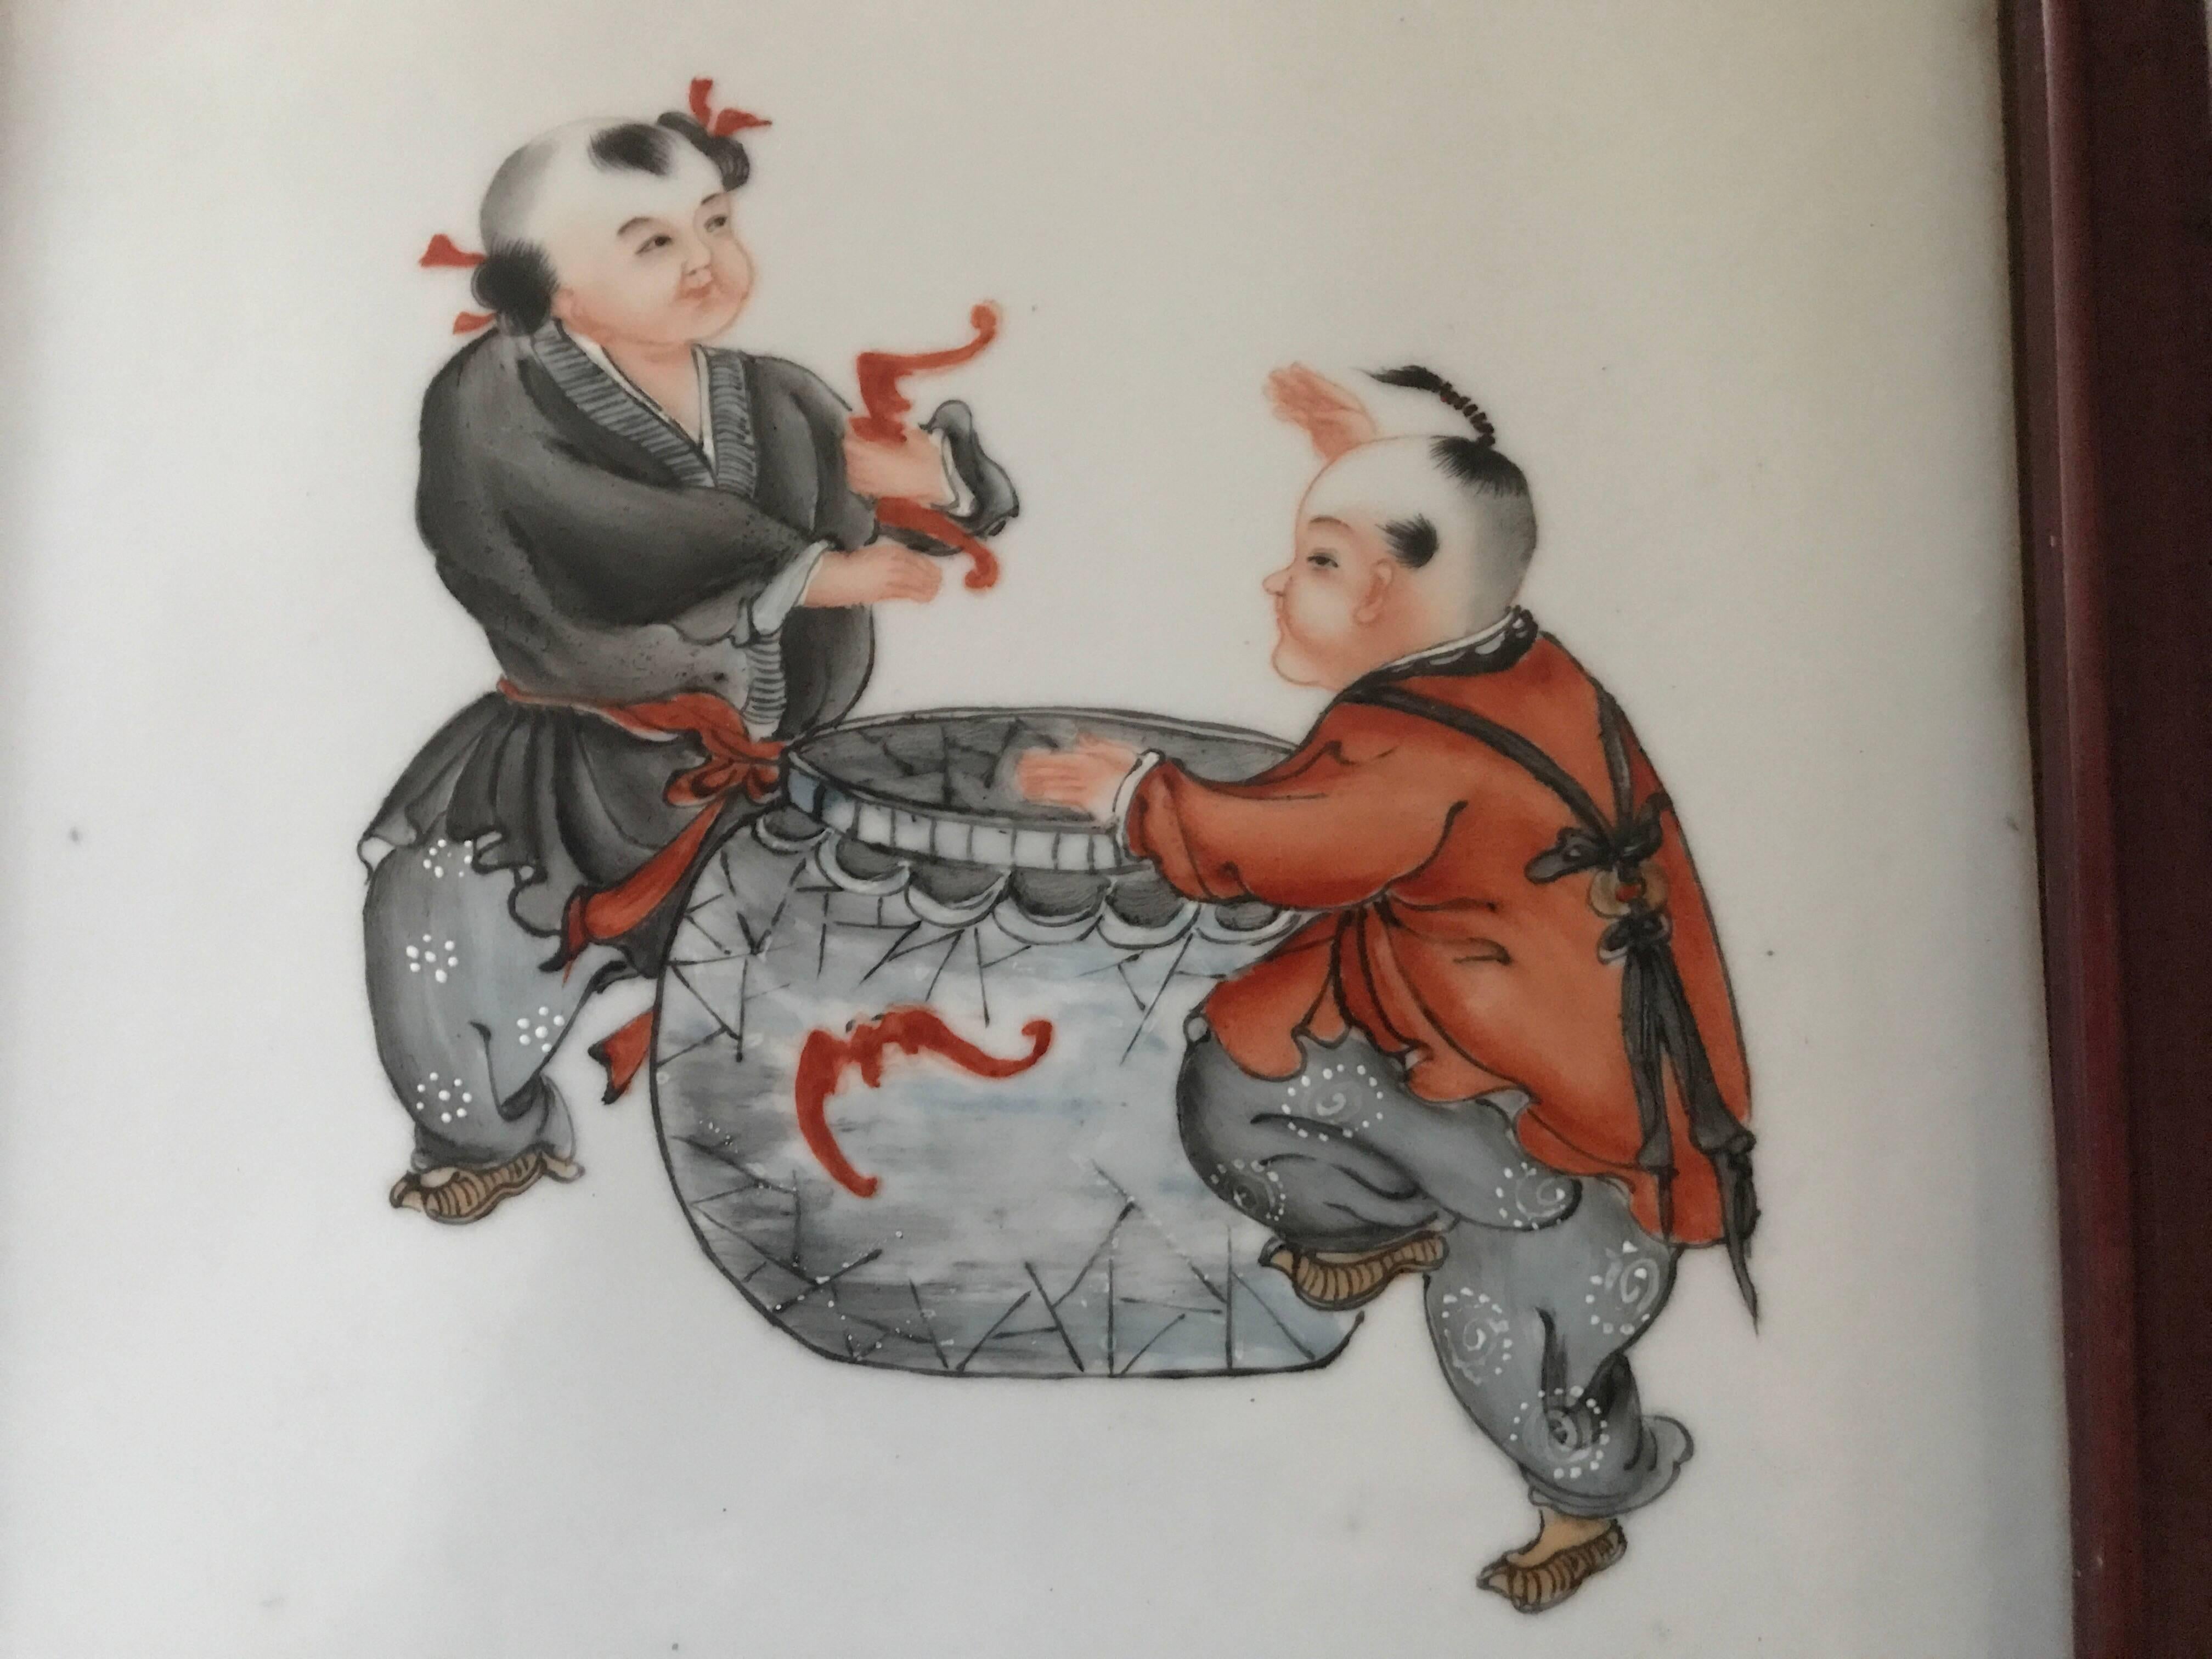 Chinese republic famille rose porcelaine framed wall plaque or wall painting.
A very nice and high quality porcelaine wall plaque made in the first half of the 20th century during the early republic era. The plaque depicts a pair of boys collecting